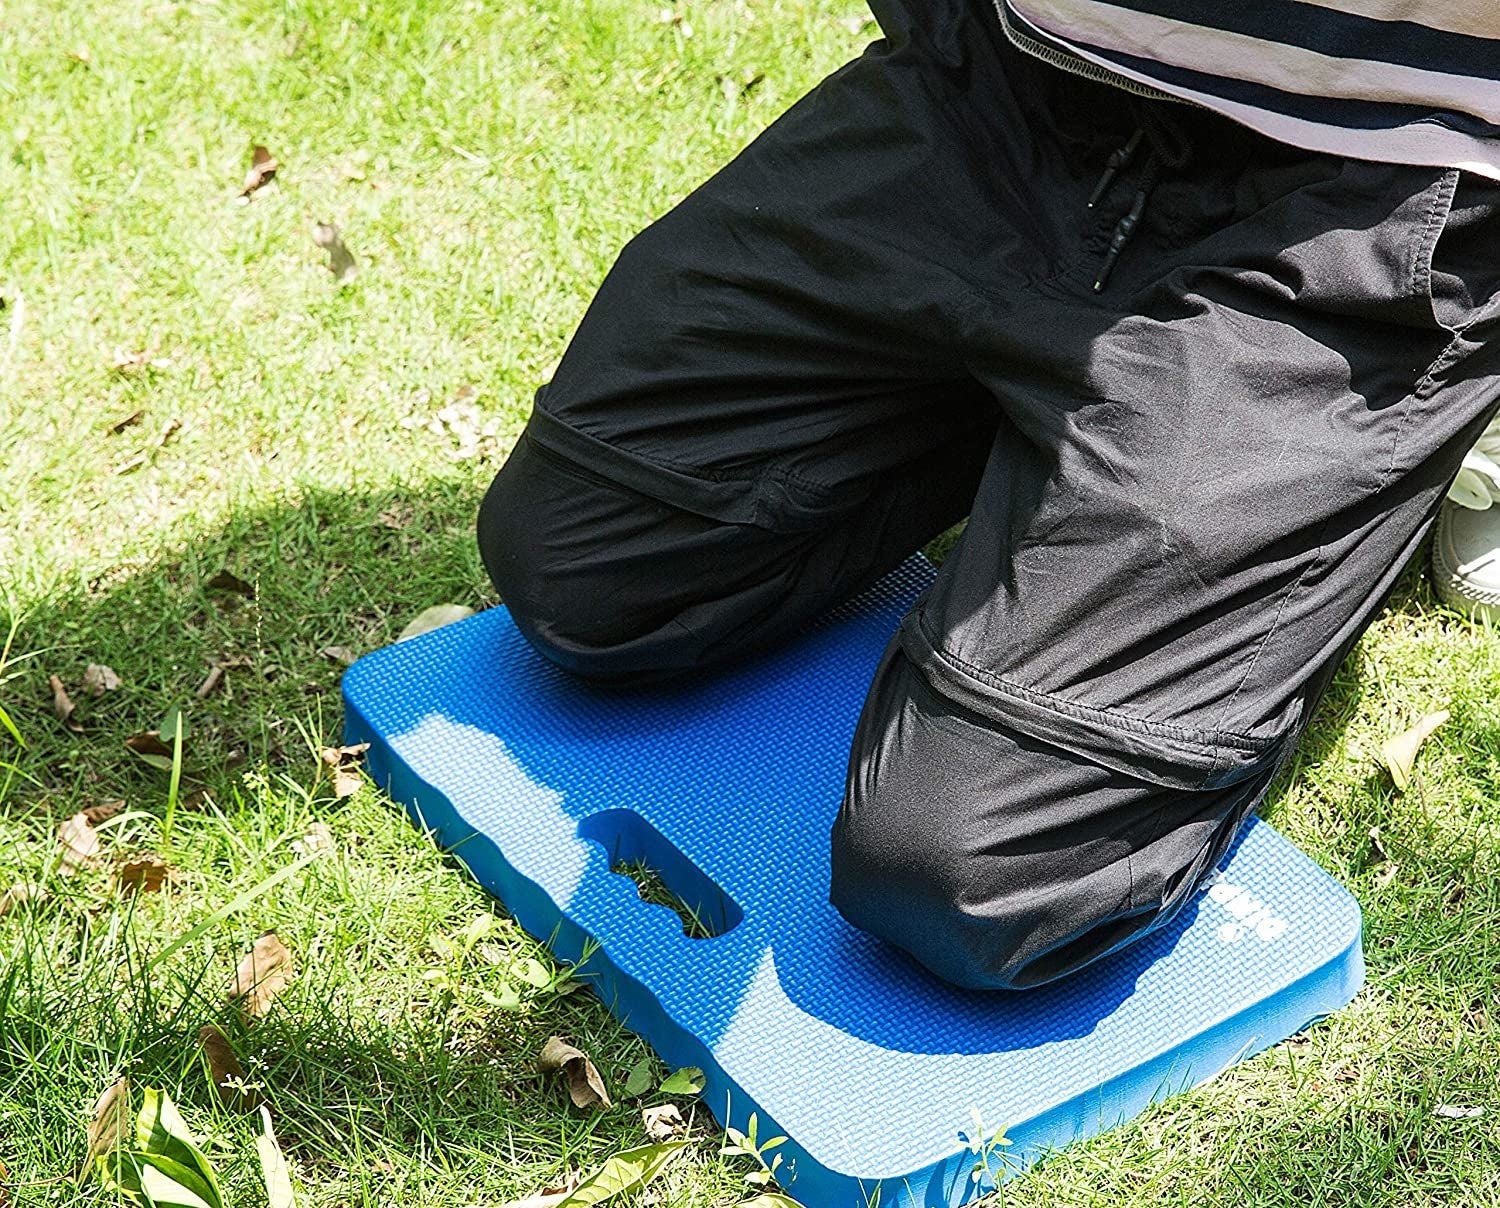 A person kneeling on the pad in a grassy yard